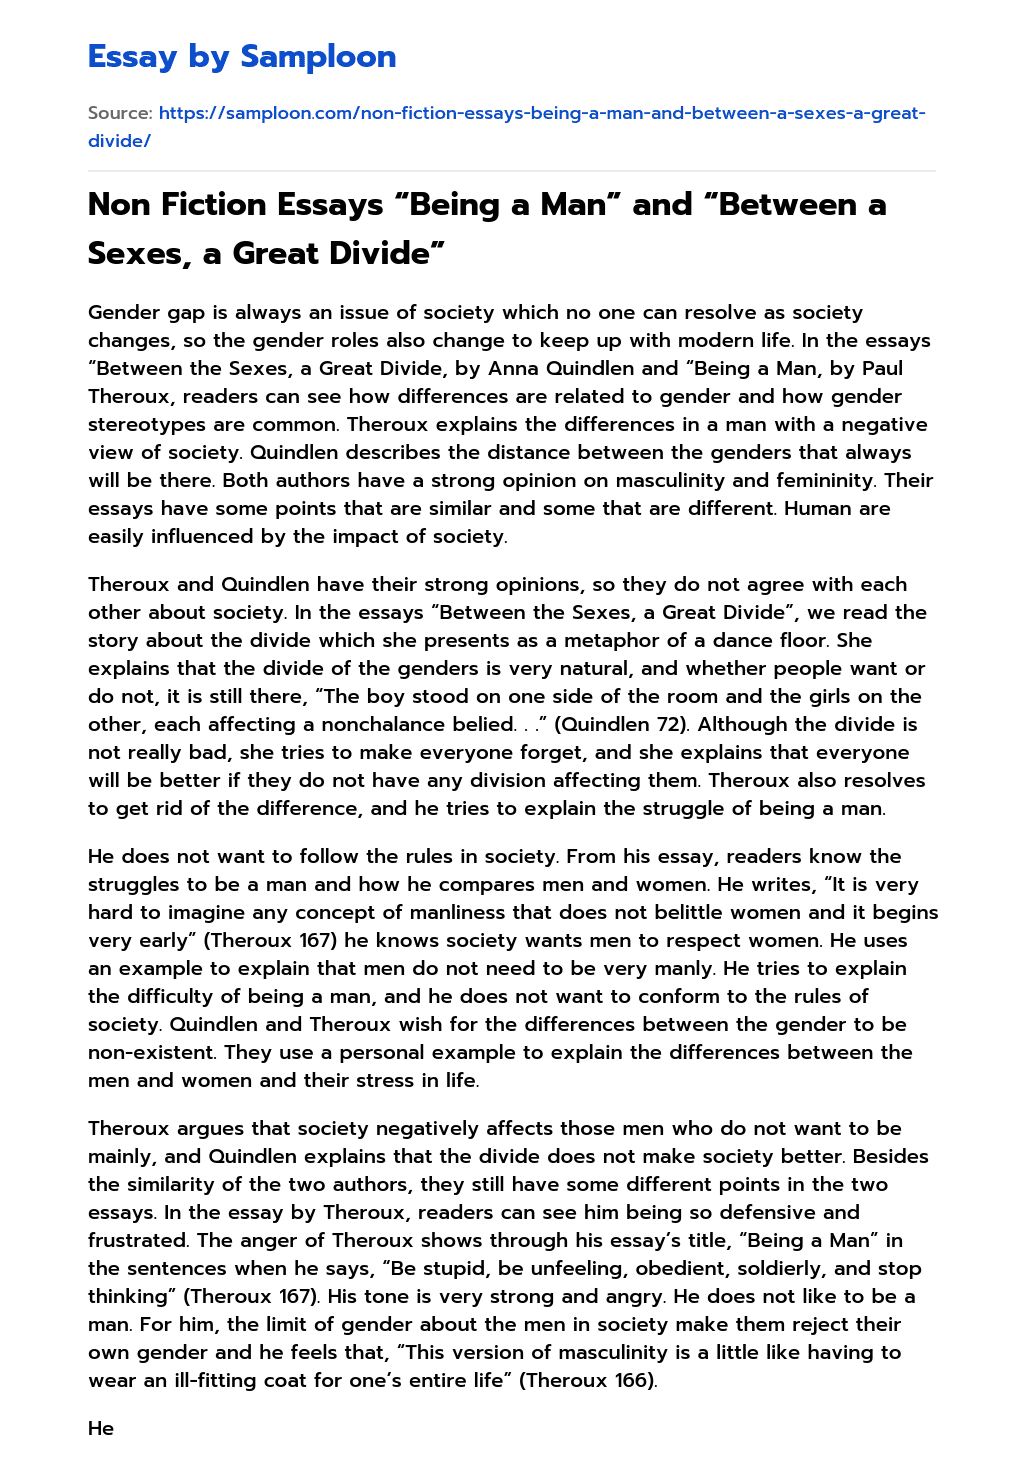 Non Fiction Essays “Being a Man” and “Between a Sexes, a Great Divide” essay